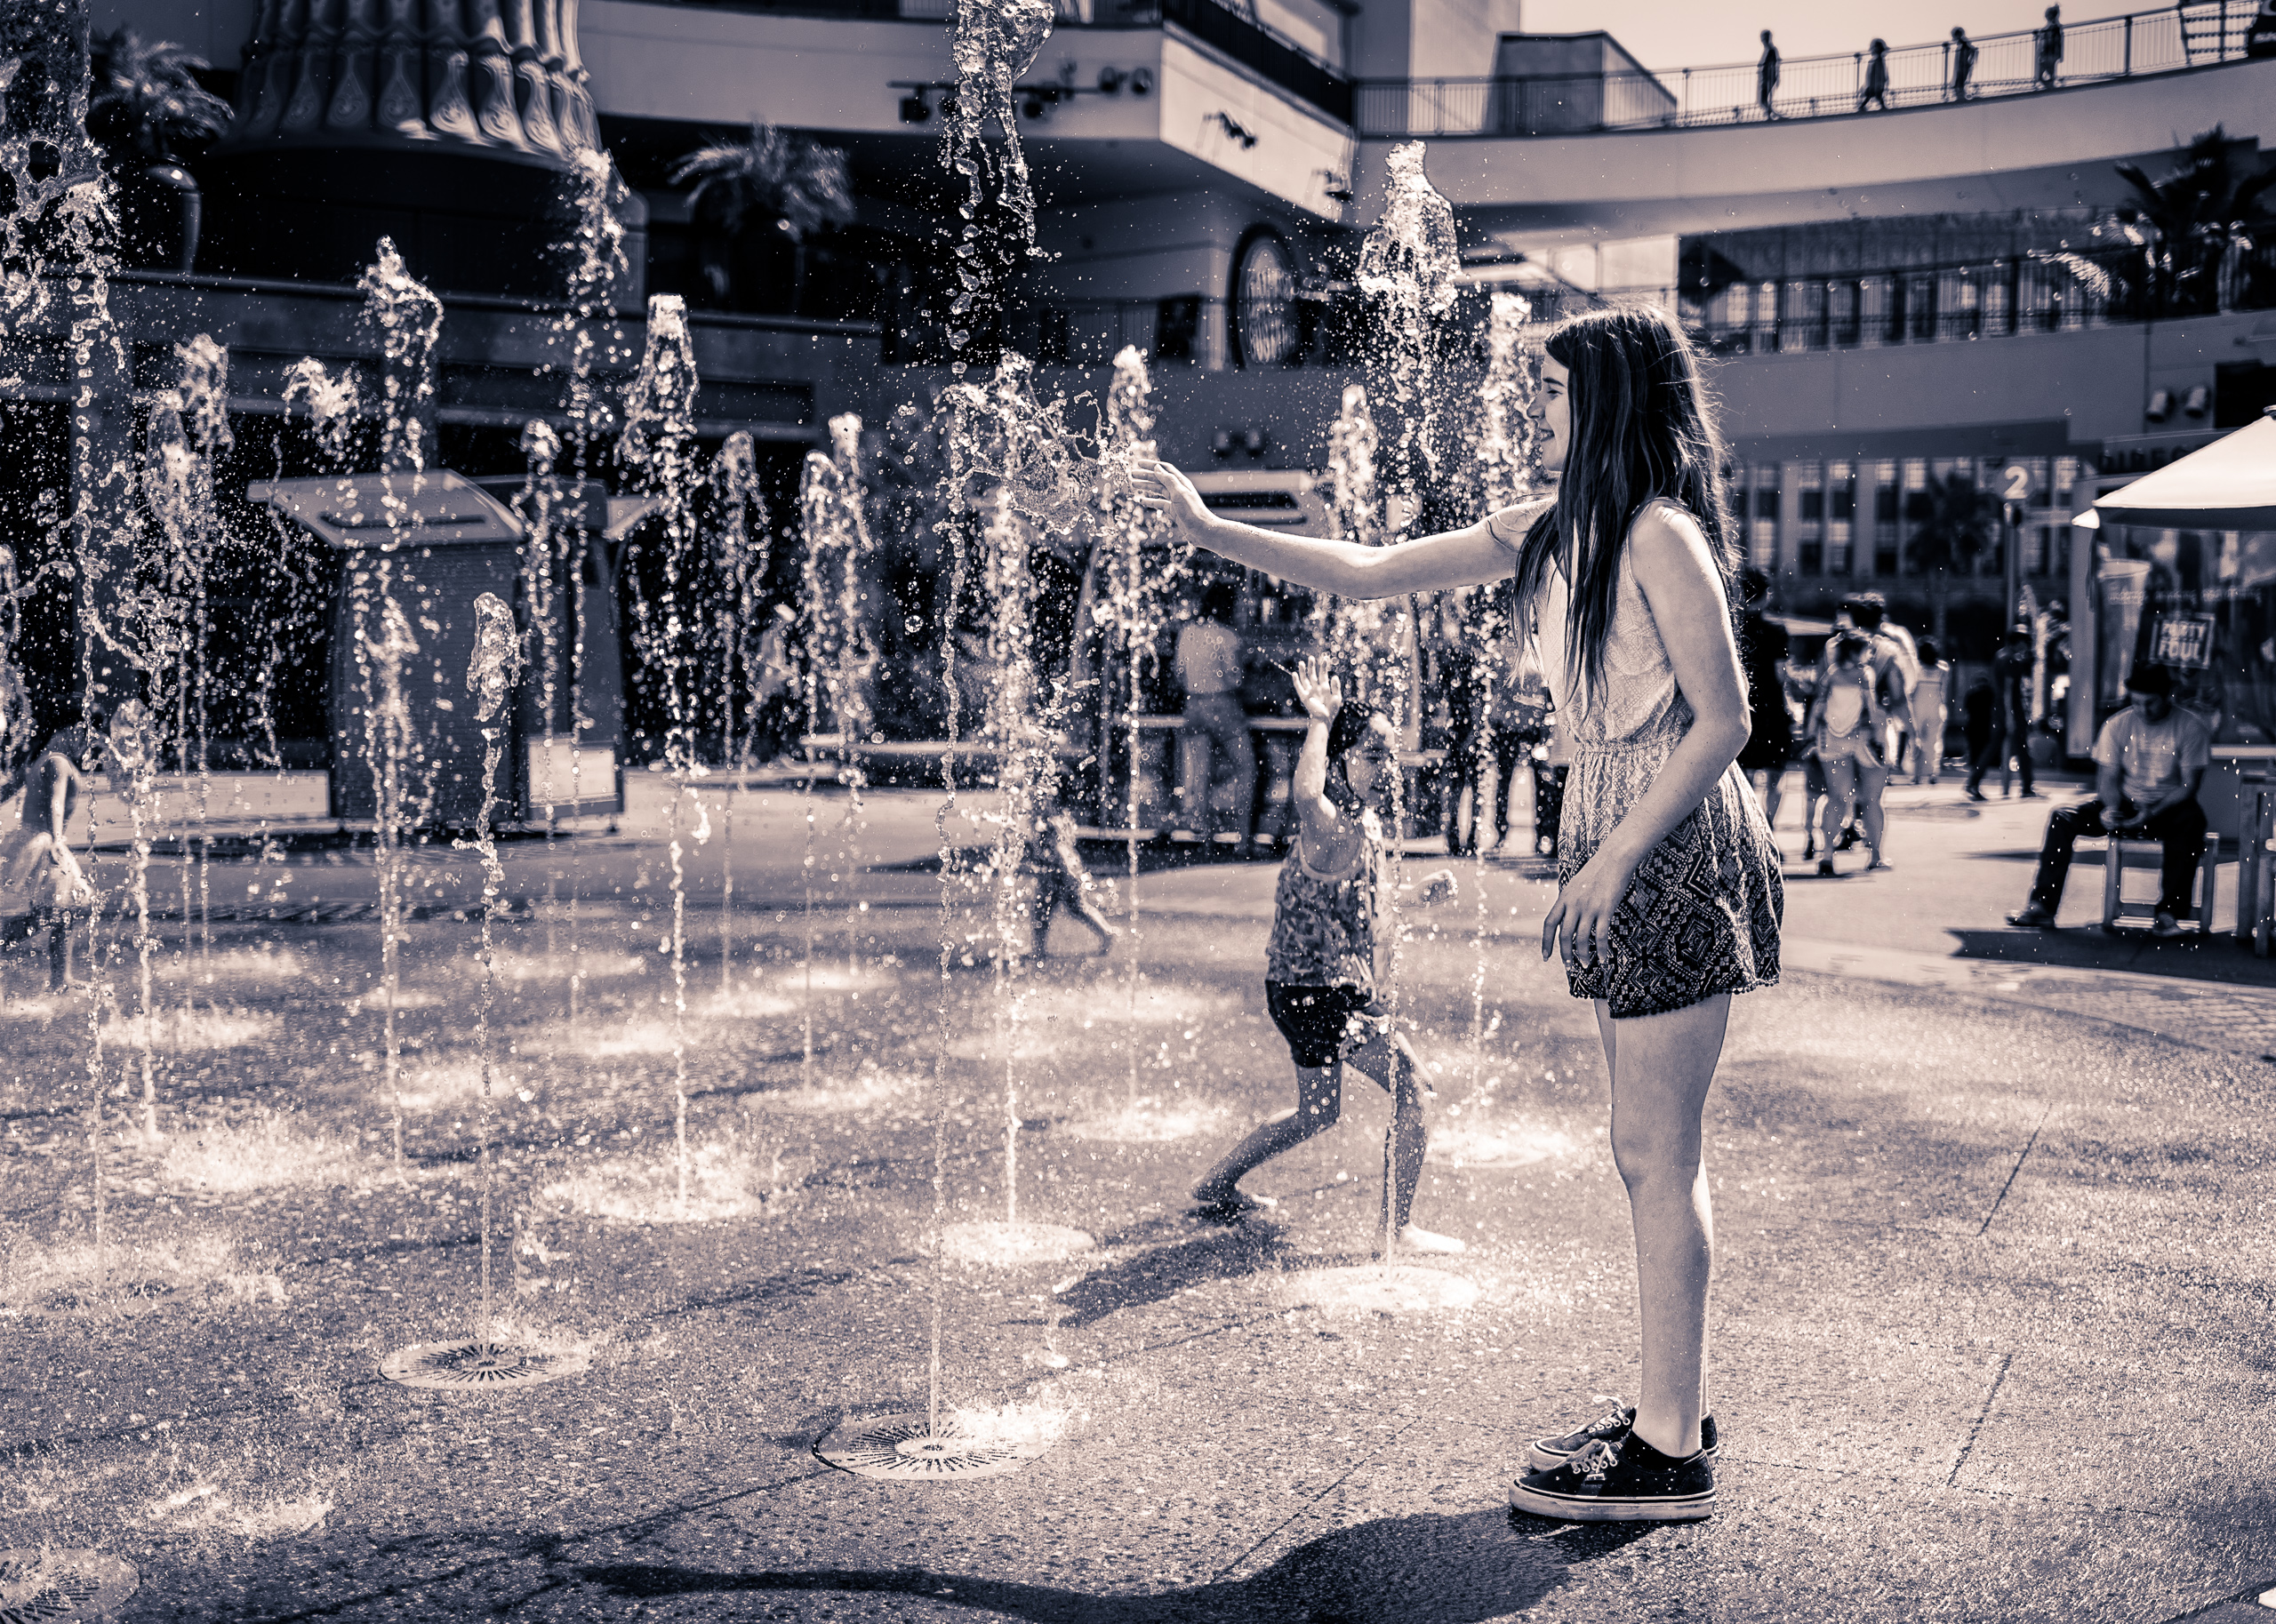 at the Hollywood & Highland water fountain, a young girl extends her hand to feel the water on a hot day in Hollywood